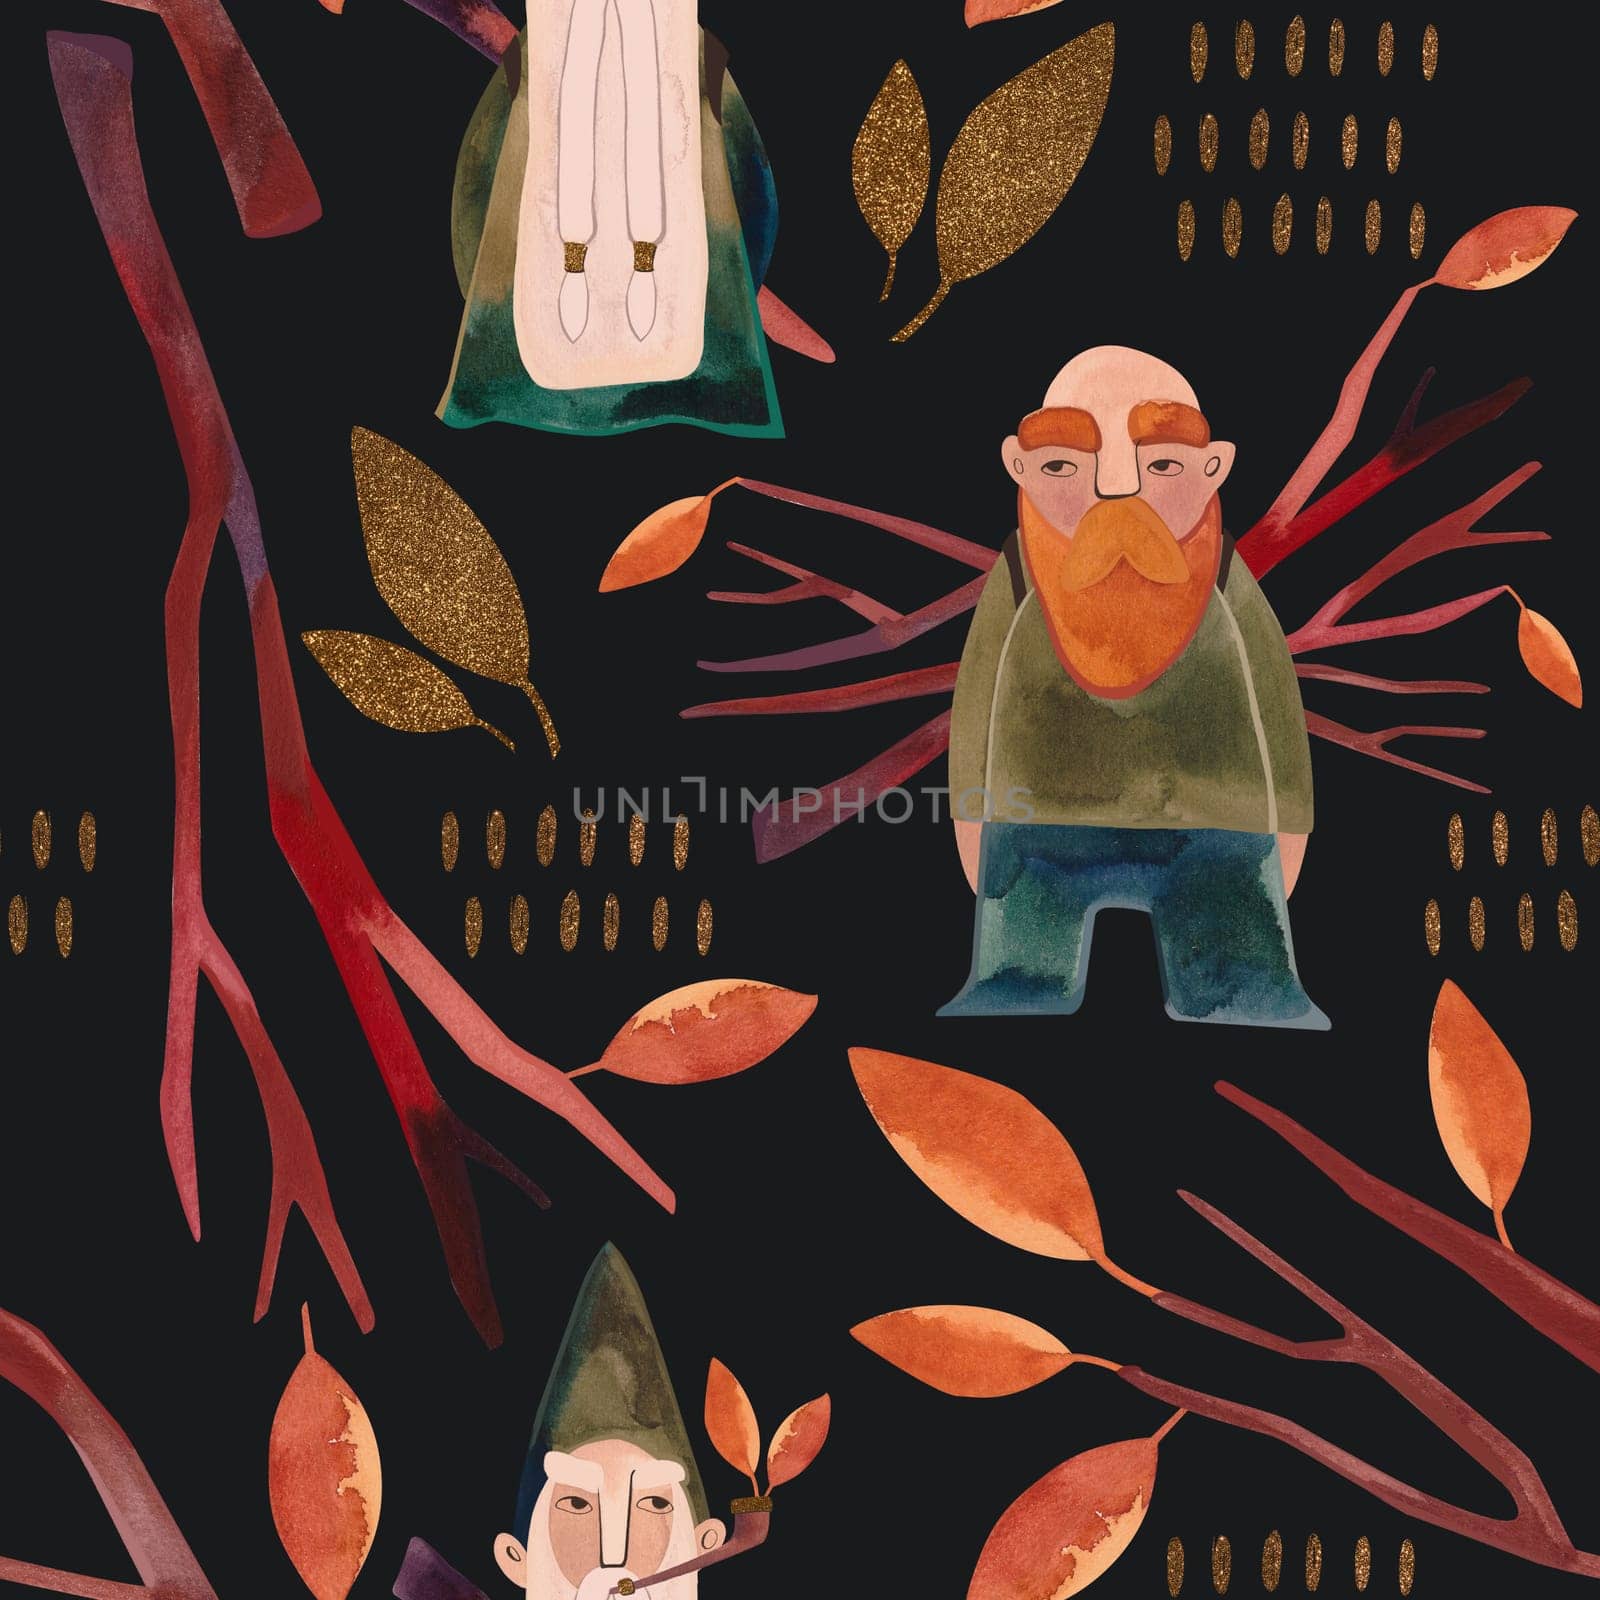 Seamless pattern with magic gnomes, orange autumn leaves, berries, twigs and baskets on a black background. Pattern for wrapping paper, home and seasonal textiles, curtains, tablecloths, kitchen and nursery decoration